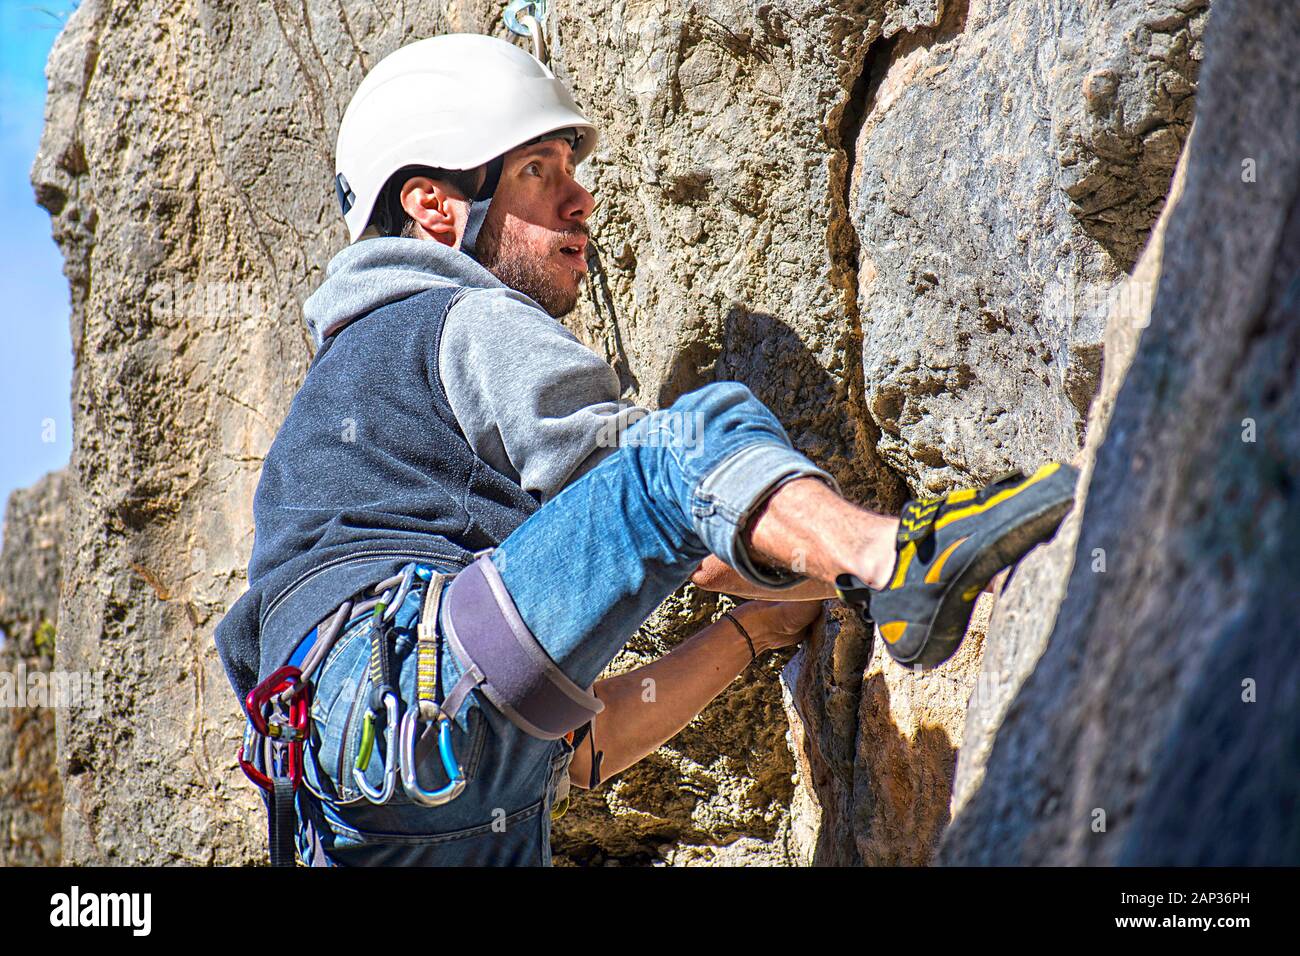 One sportsman mountain climbing. Physical activity in the countryside. Risky sports. Mountain climb or climbing is a dangerous exercise that needs saf Stock Photo